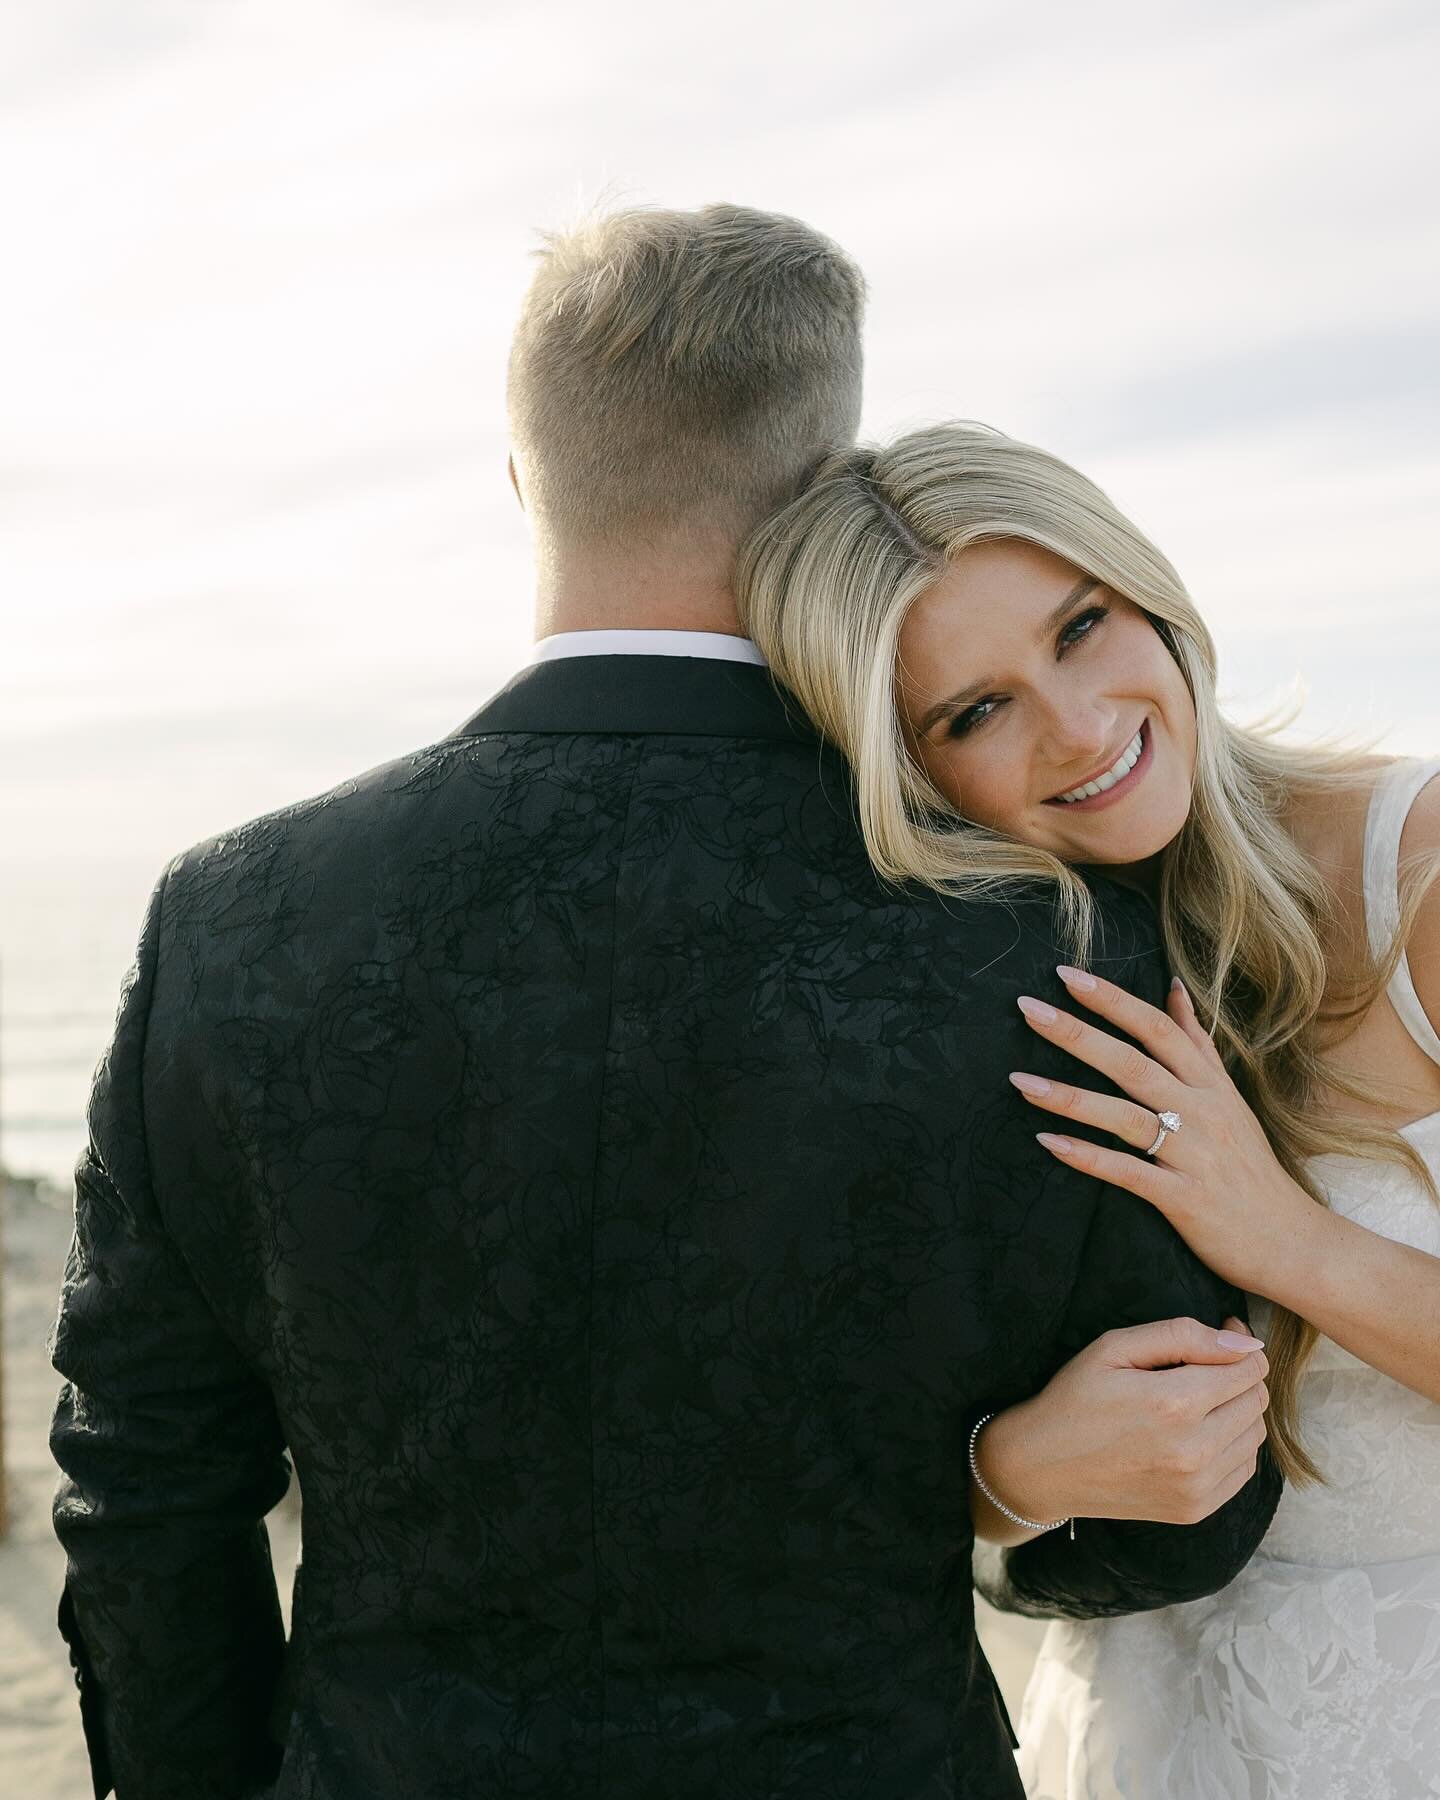 Congratulations @rachelchid!!! 
Your wedding at the  @alilamareabeachresort was stunning. I had so much fun getting you ready both days. Thank you for making us a part of your wedding and memories. 

Venue @alilamareabeachresort 
Encinitas Planner @h